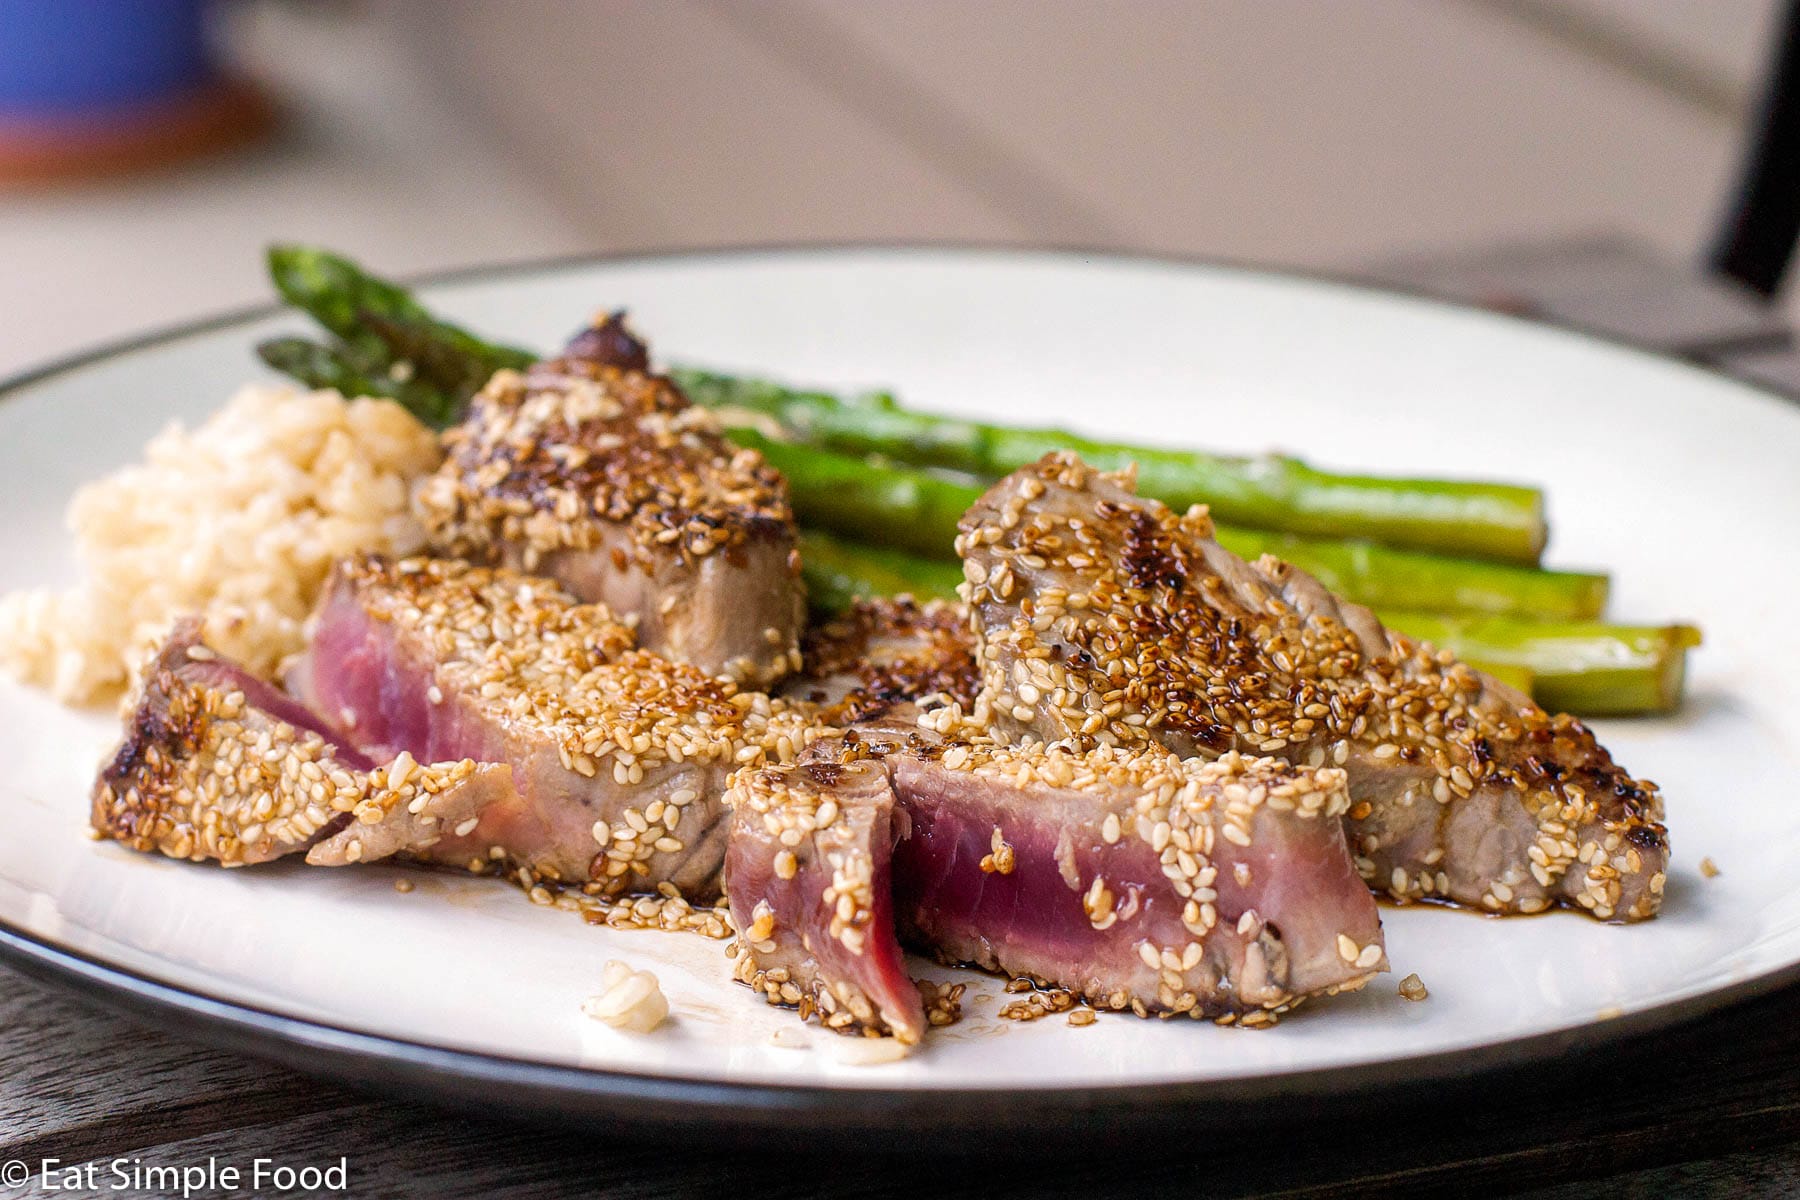 4 small pieces of tuna coated in sesame seeds and fried. One is cut open to expose the rare inside. On a plate with asparagus.